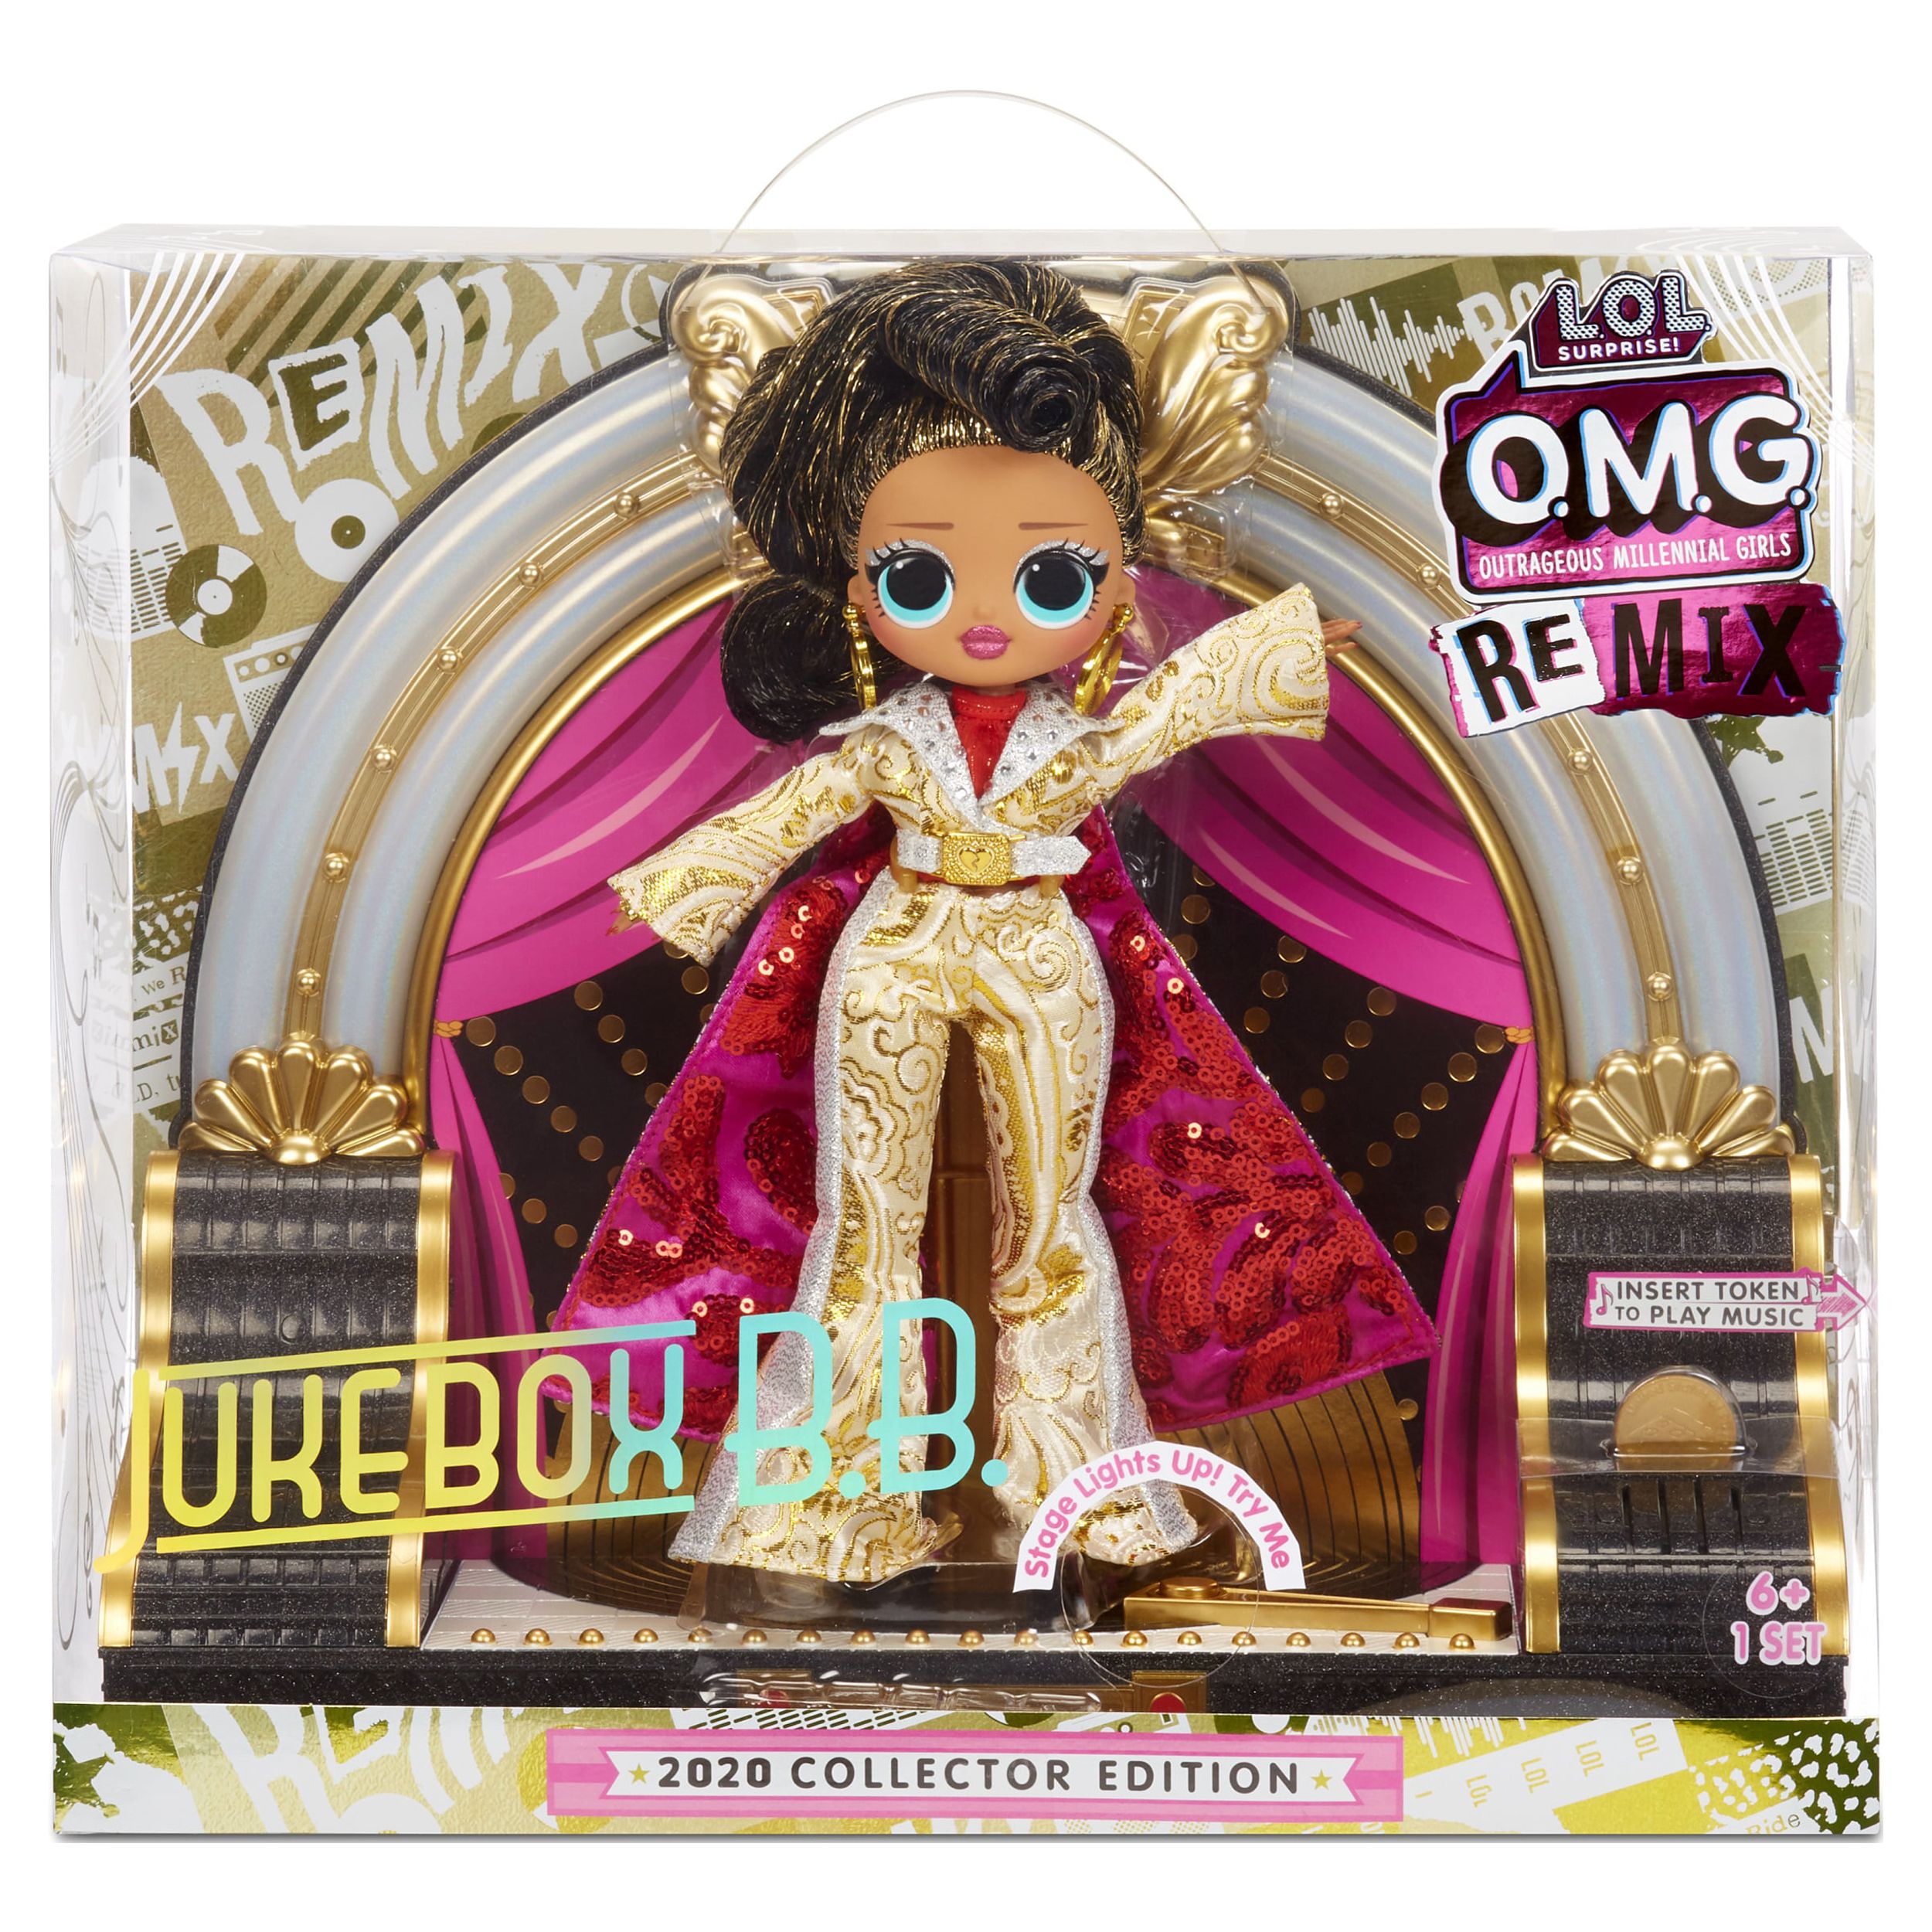 LOL Surprise OMG Remix 2020 Collector Edition Jukebox B.B With Music, Great Gift for Kids Ages 4 5 6+ - image 3 of 7